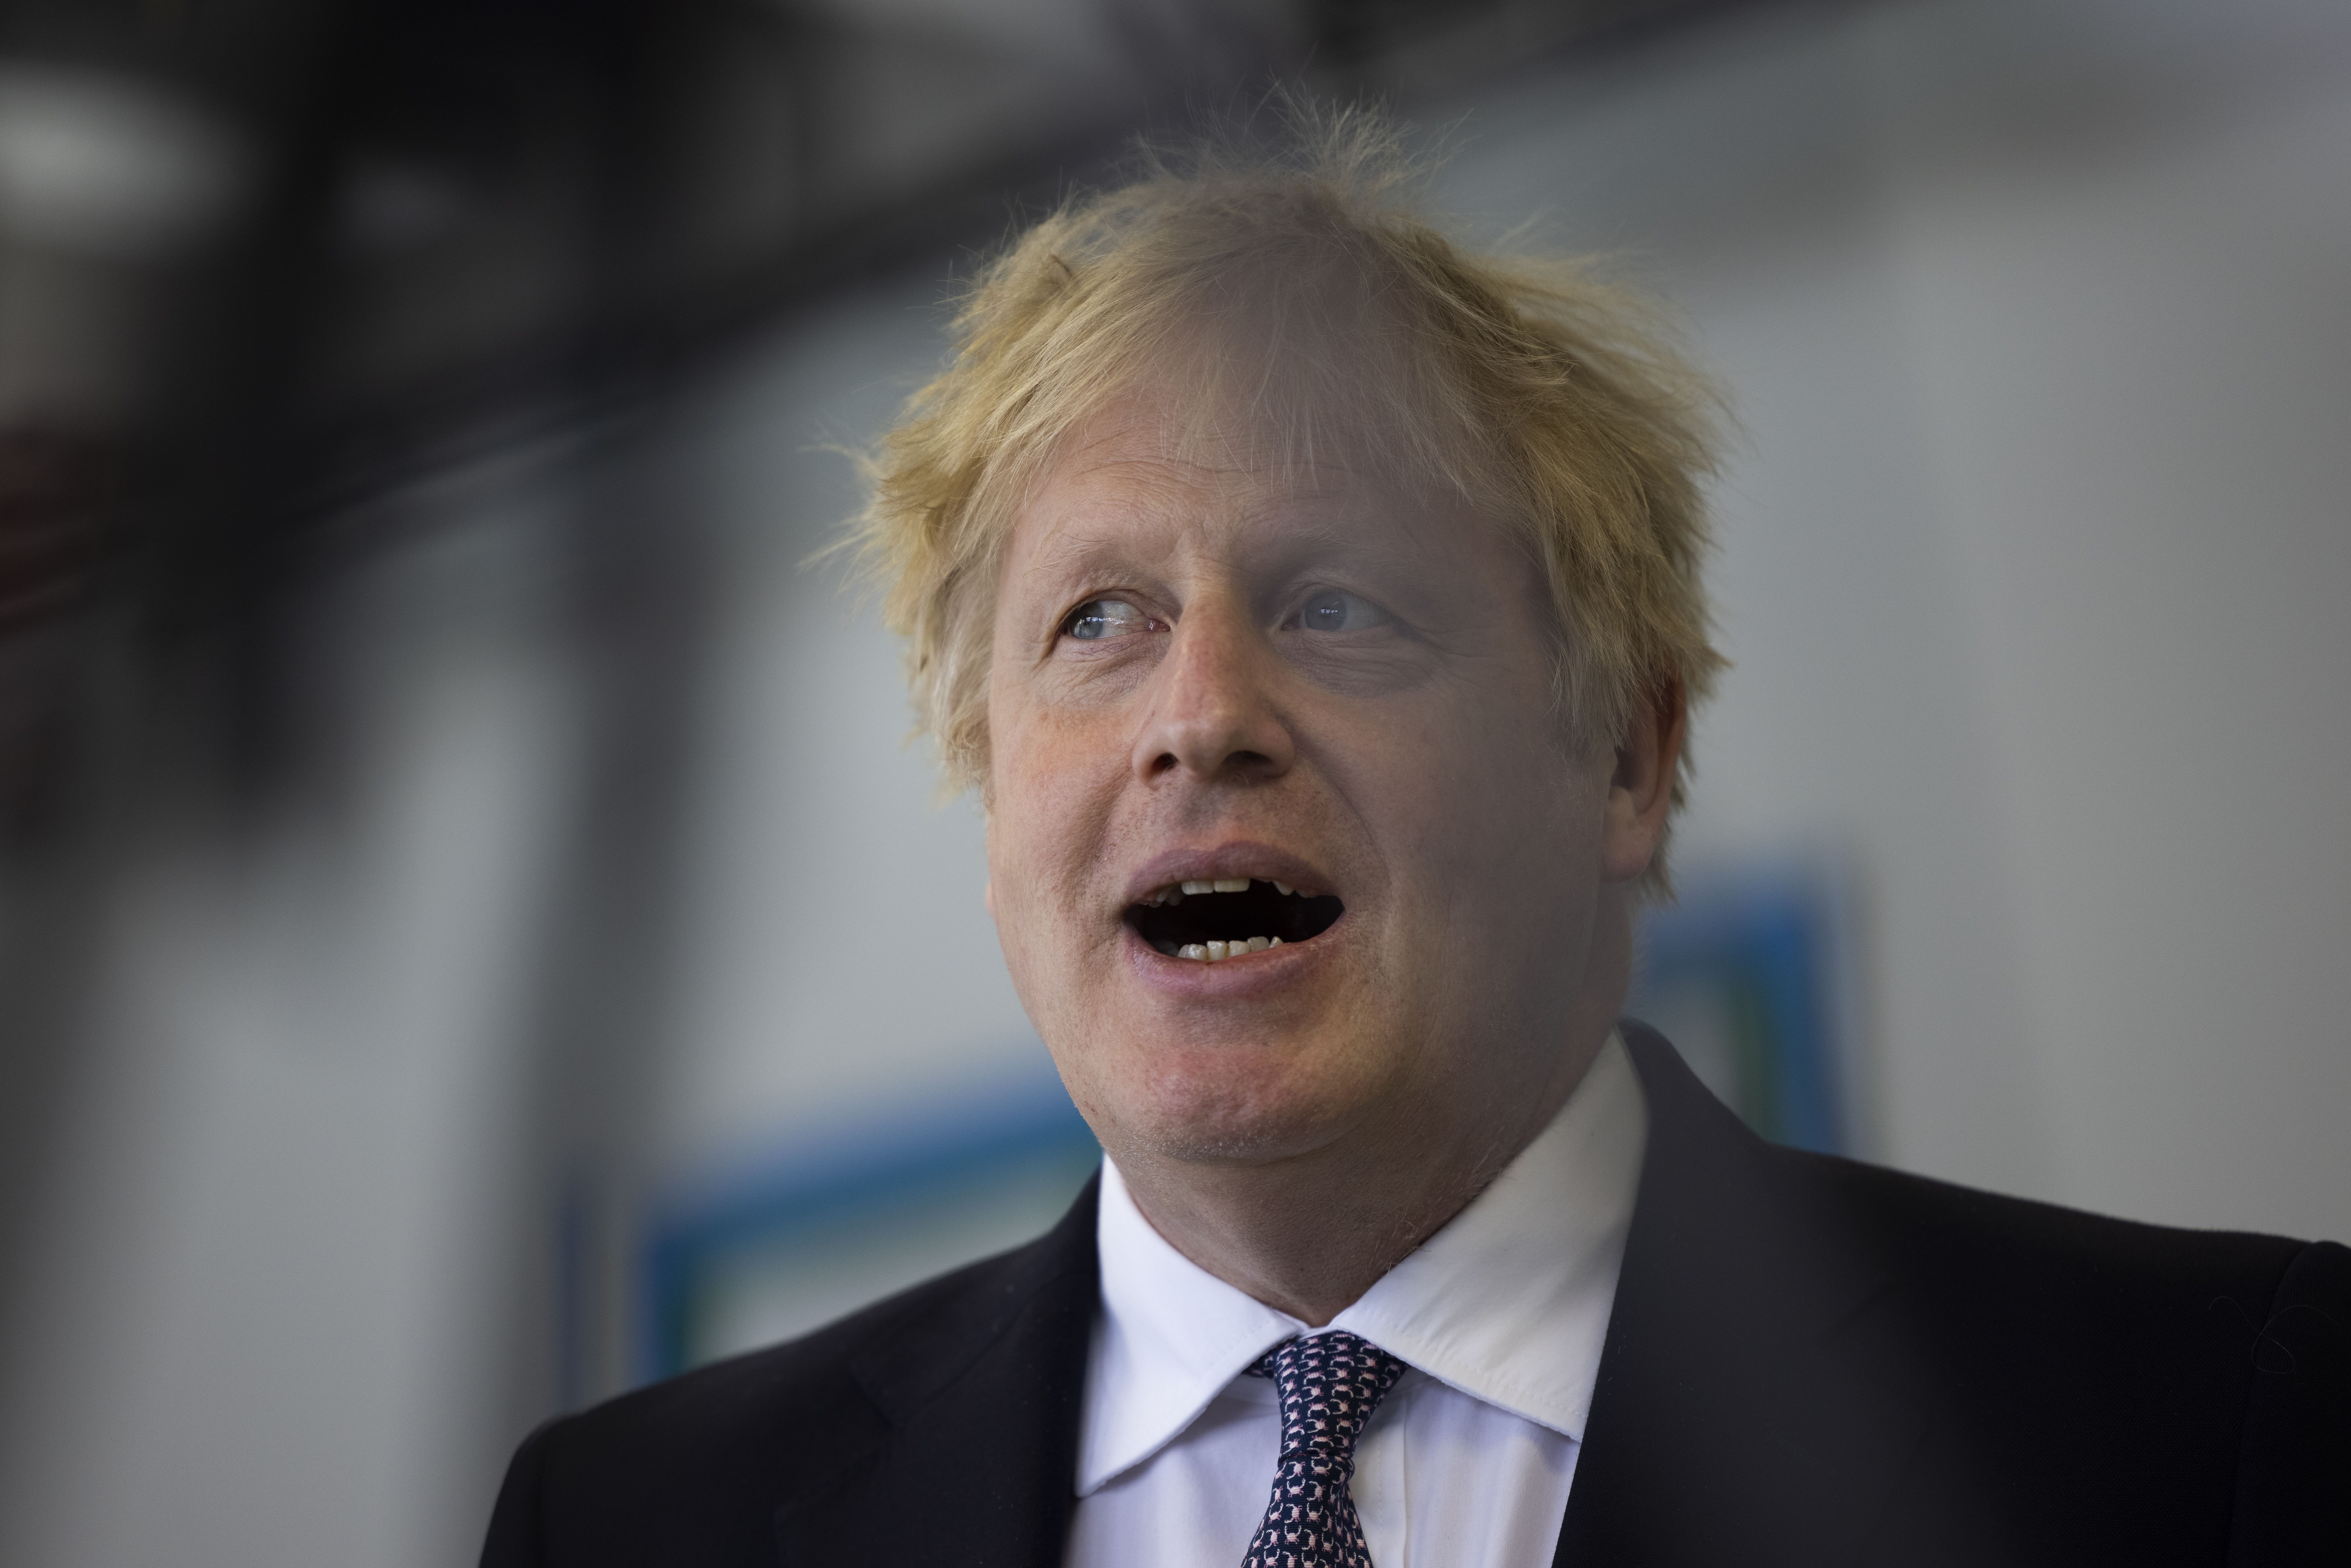 Prime Minister Boris Johnson answers questions from the